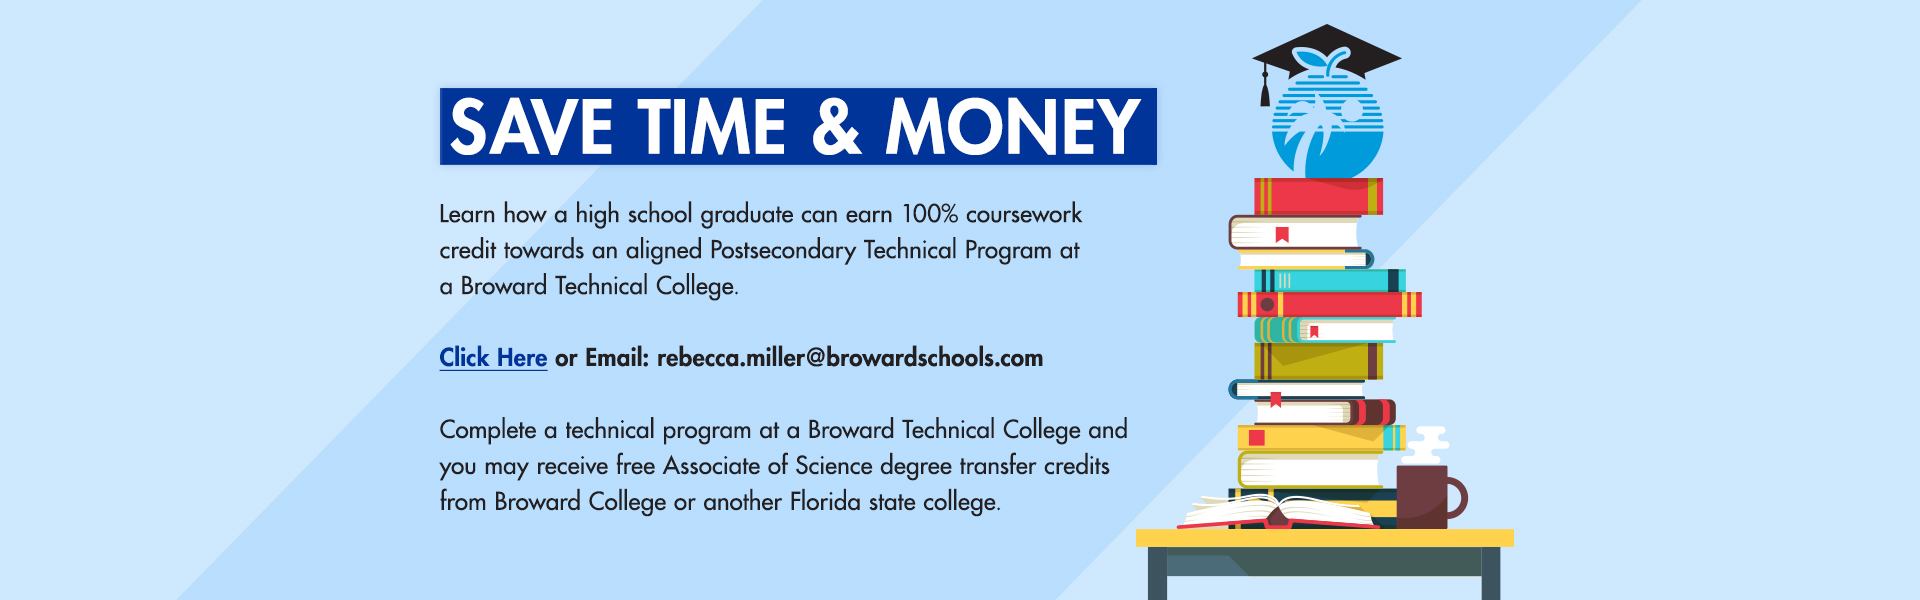 Save Time & Money - Learn how a high school graduate can earn 100% coursework credit towards an aligned Postsecondary Technical Program at Broward Technical College. Click here or email: rebecca.miller@browardschools.com . Complete a technical program at a Broward Technical College and you may receive free Associate of Science degree transfer credits from Broward College or another Florida state college.